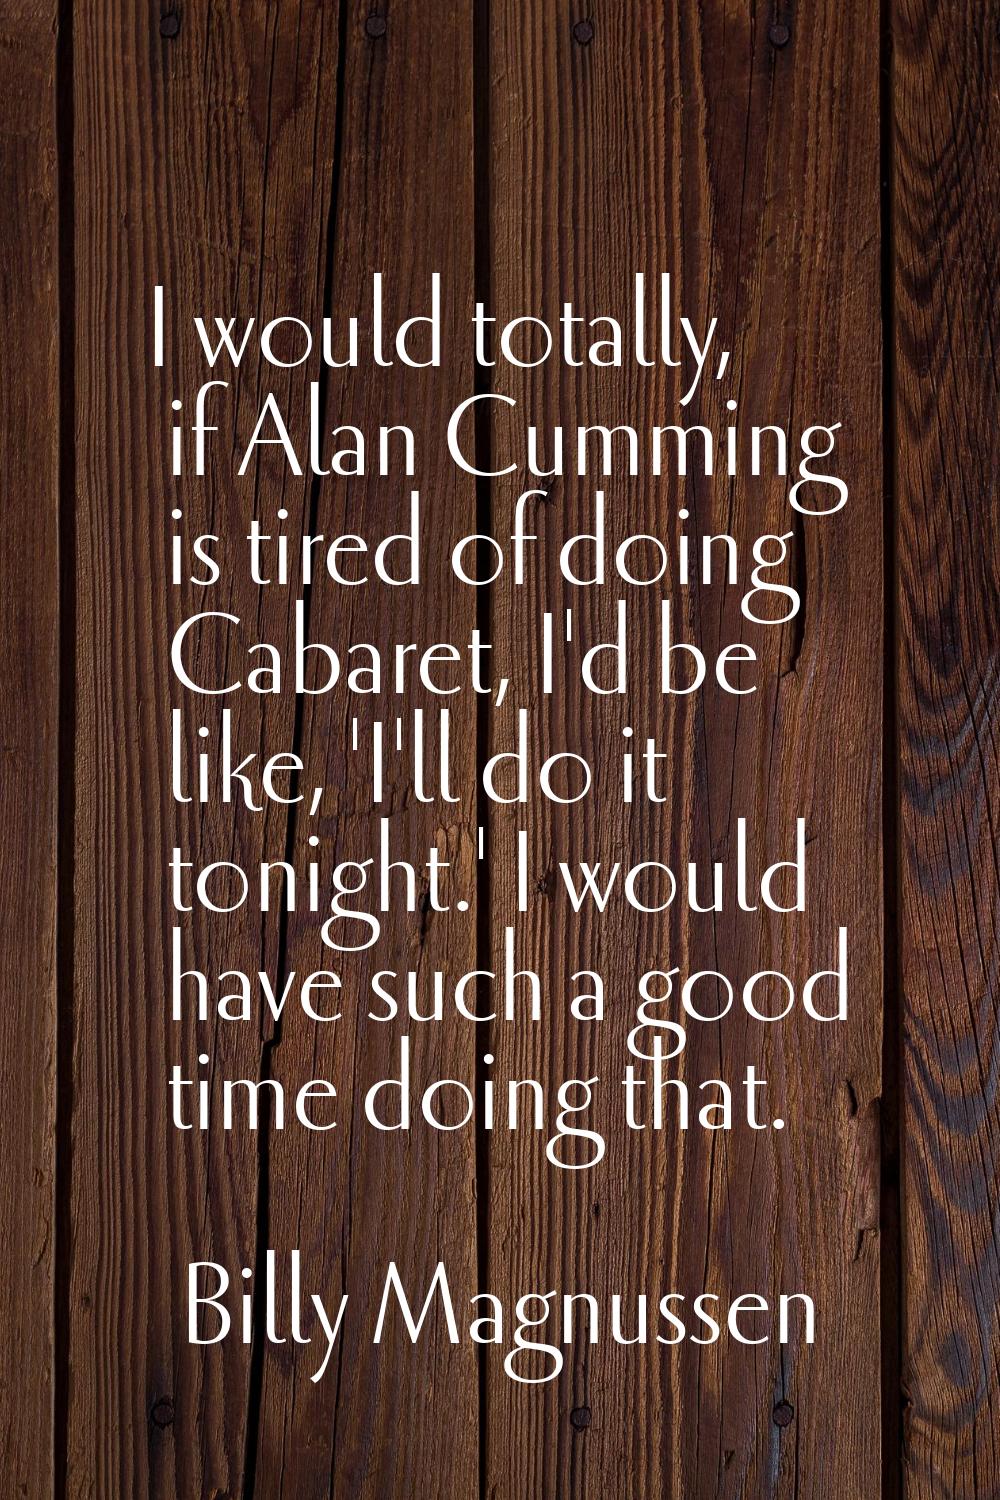 I would totally, if Alan Cumming is tired of doing Cabaret, I'd be like, 'I'll do it tonight.' I wo